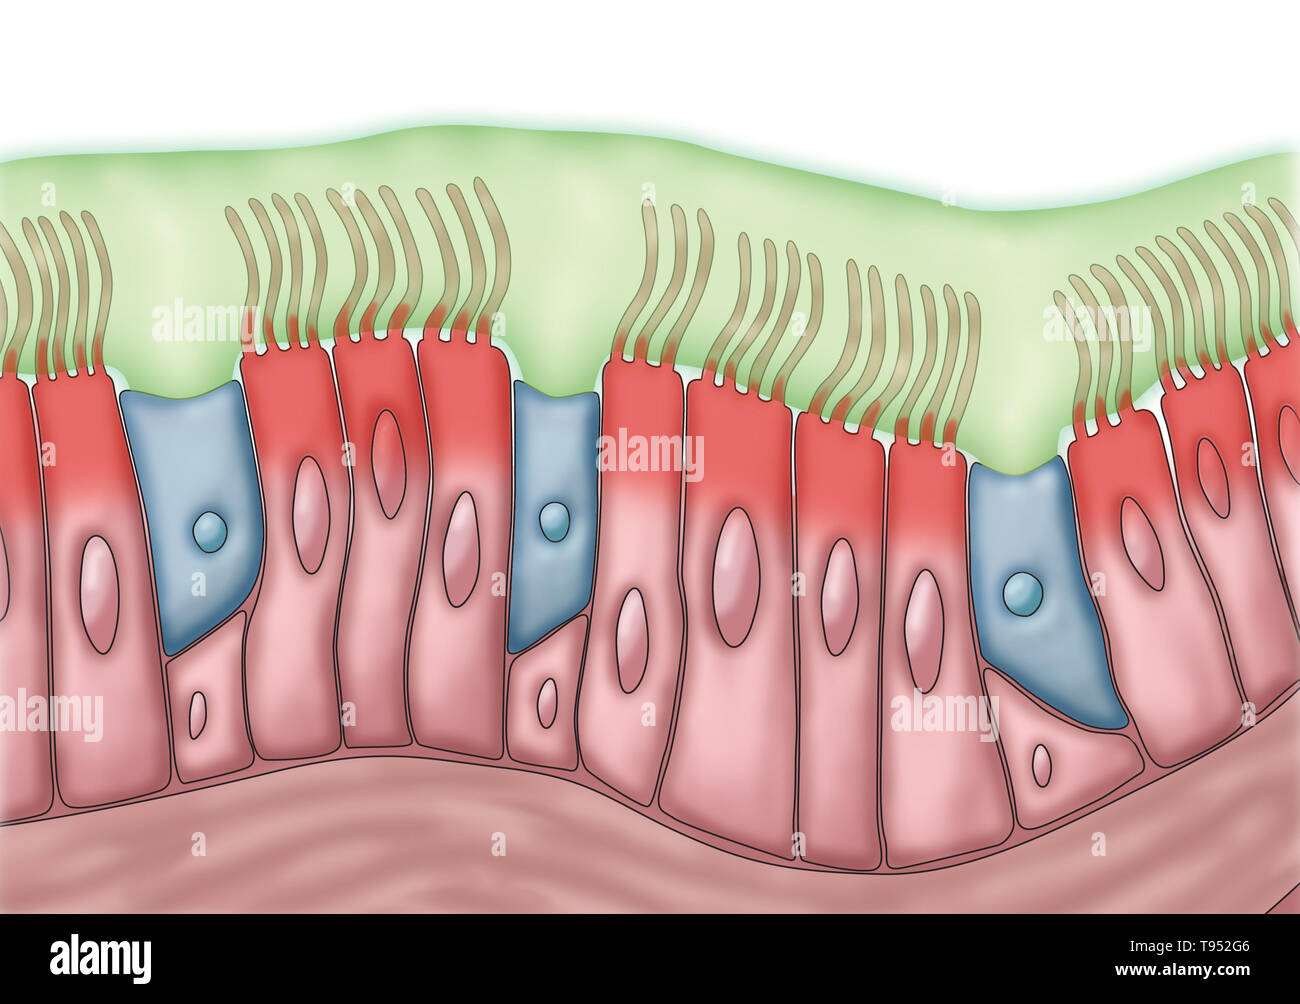 Medical illustration depicting cilia and mucus. The rhythmic back and forth movement of the cilia move mucus and trapped particles, such as bacteria and viruses, out of the sinuses. Stock Photo